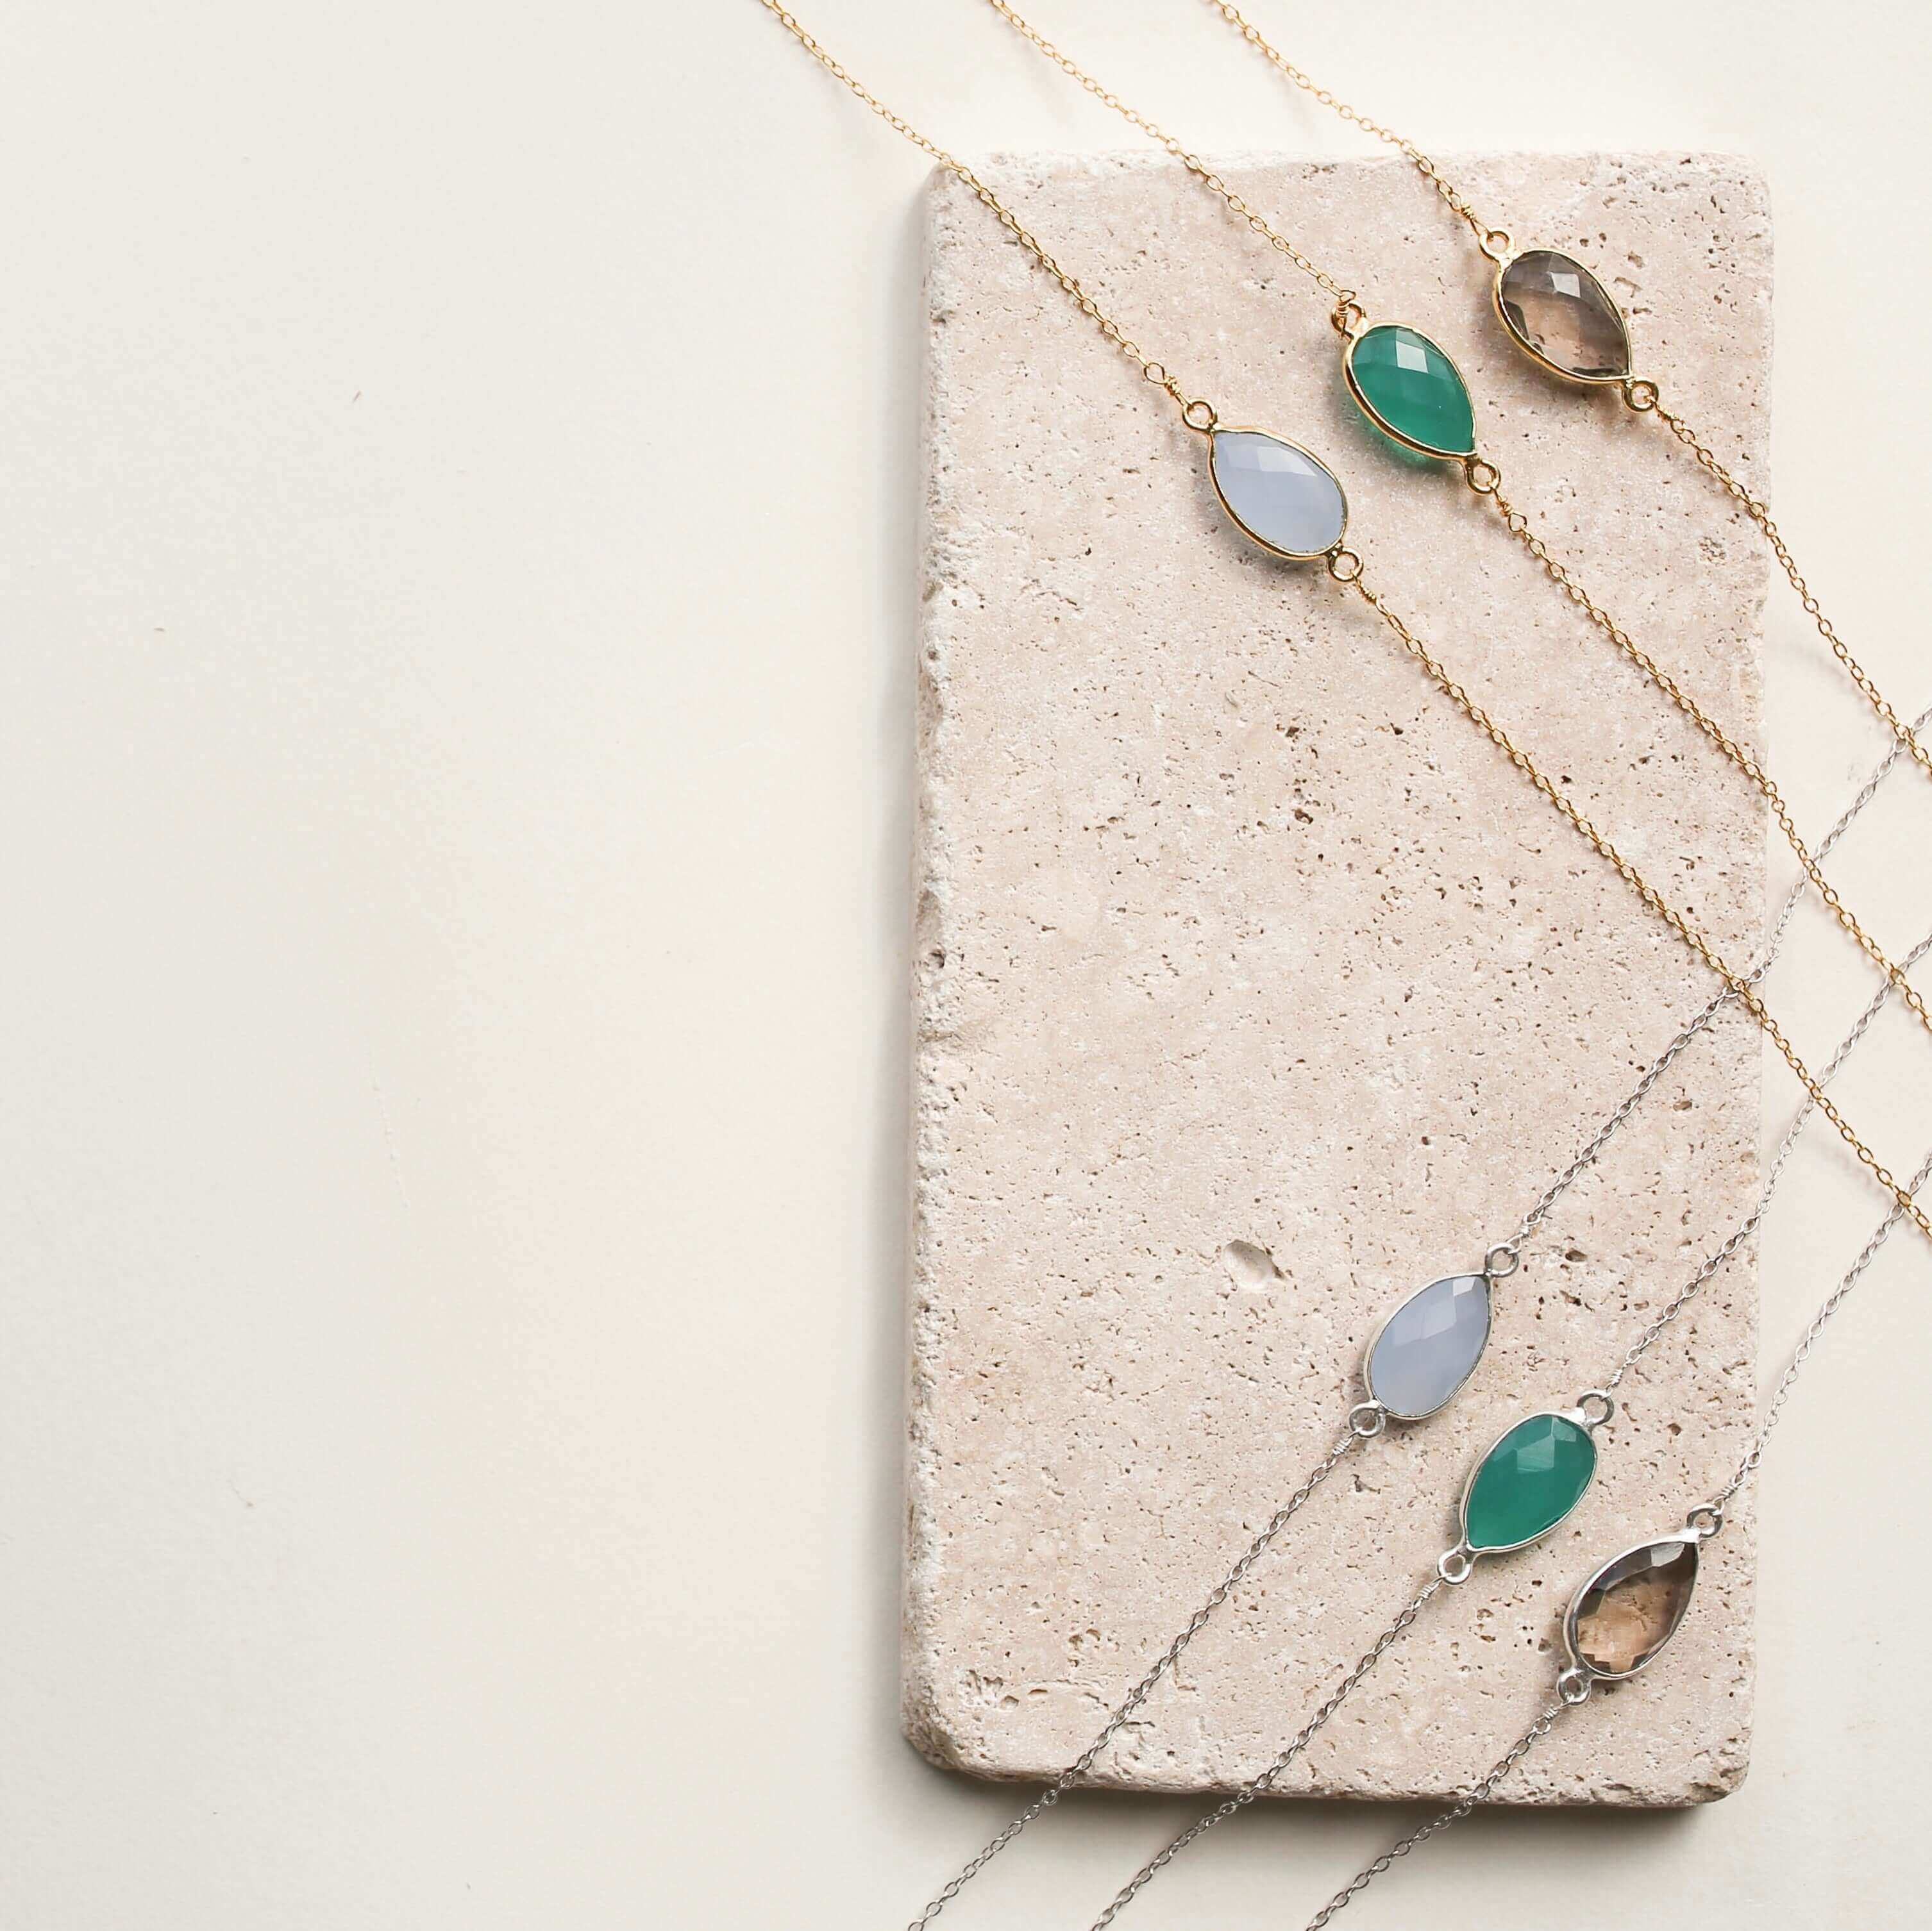 Gold and Silver Necklaces with Colorful Stones